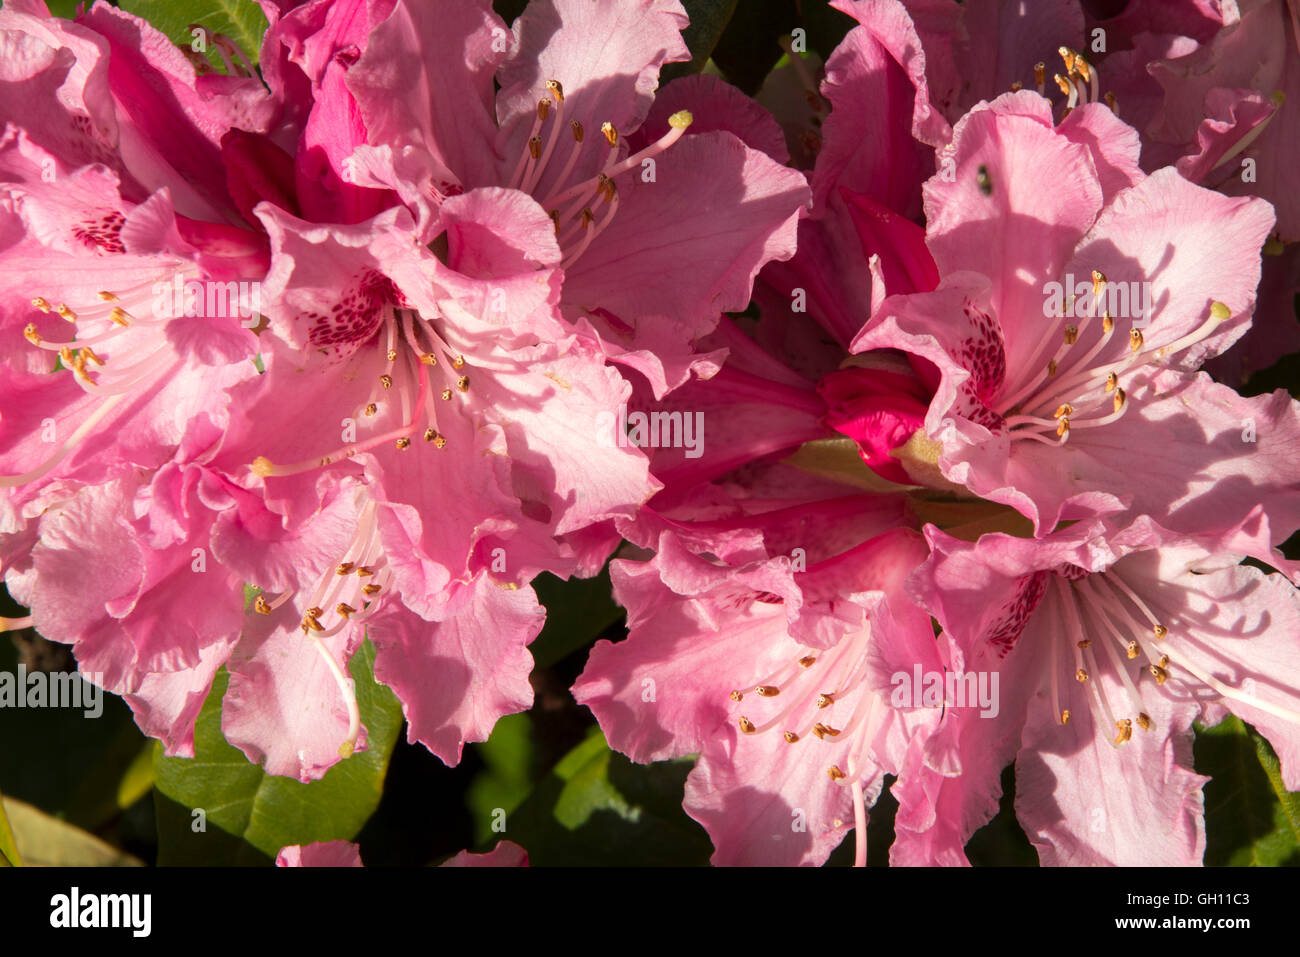 UK, England, Cheshire, Astbury, St Mary’s Churchyard, pink rhododendron flowers Stock Photo